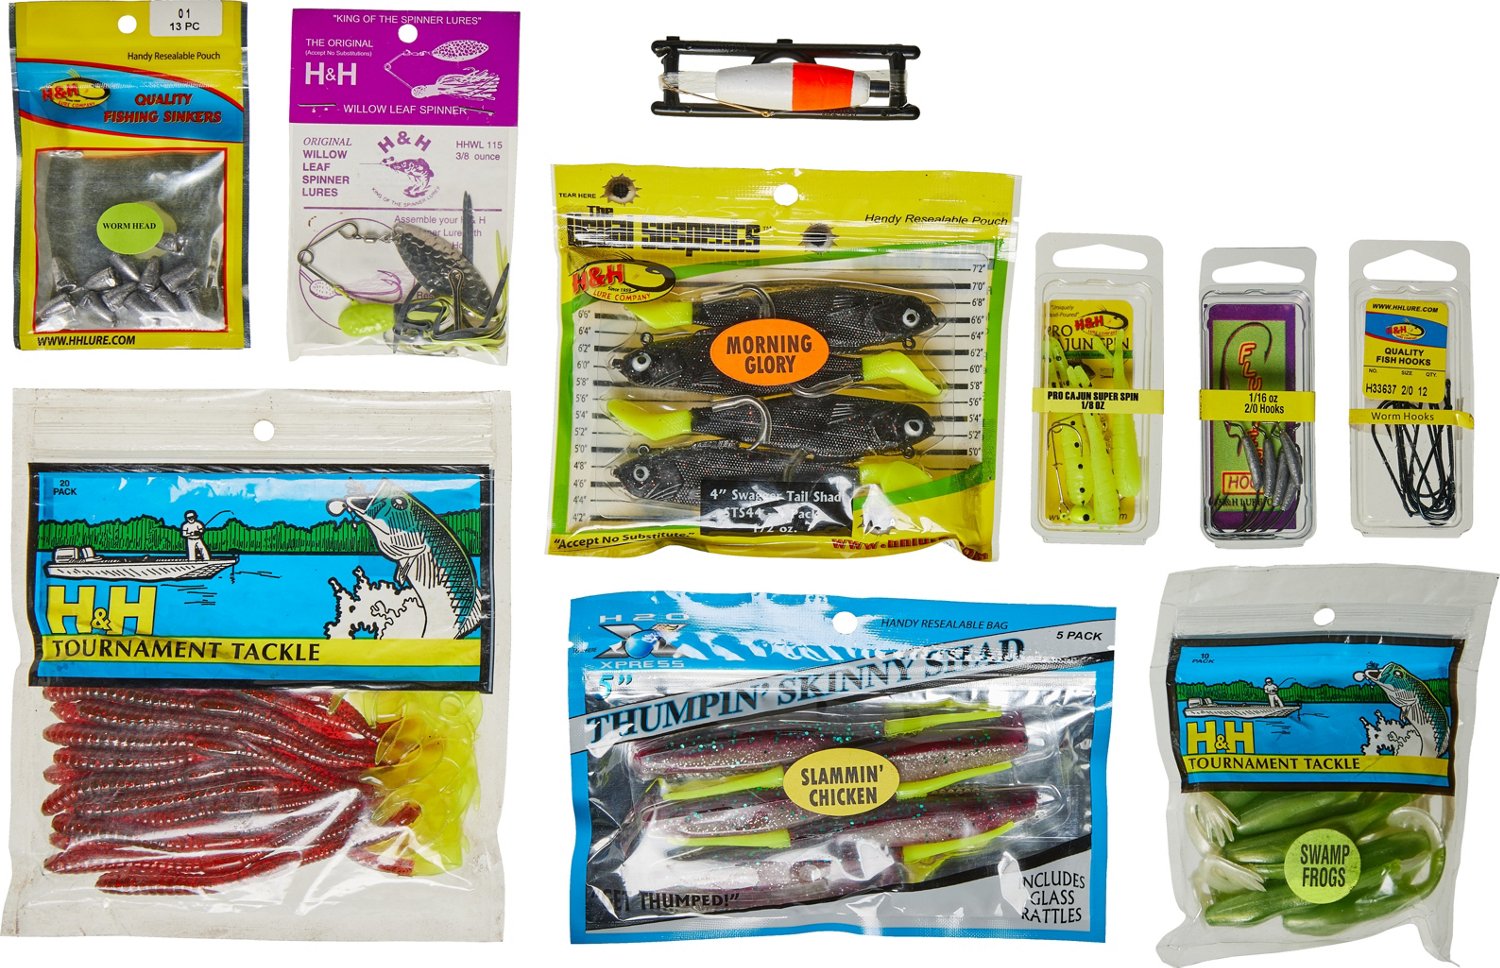 Academy Sports + Outdoors H&H Lure Freshwater Fish Kit